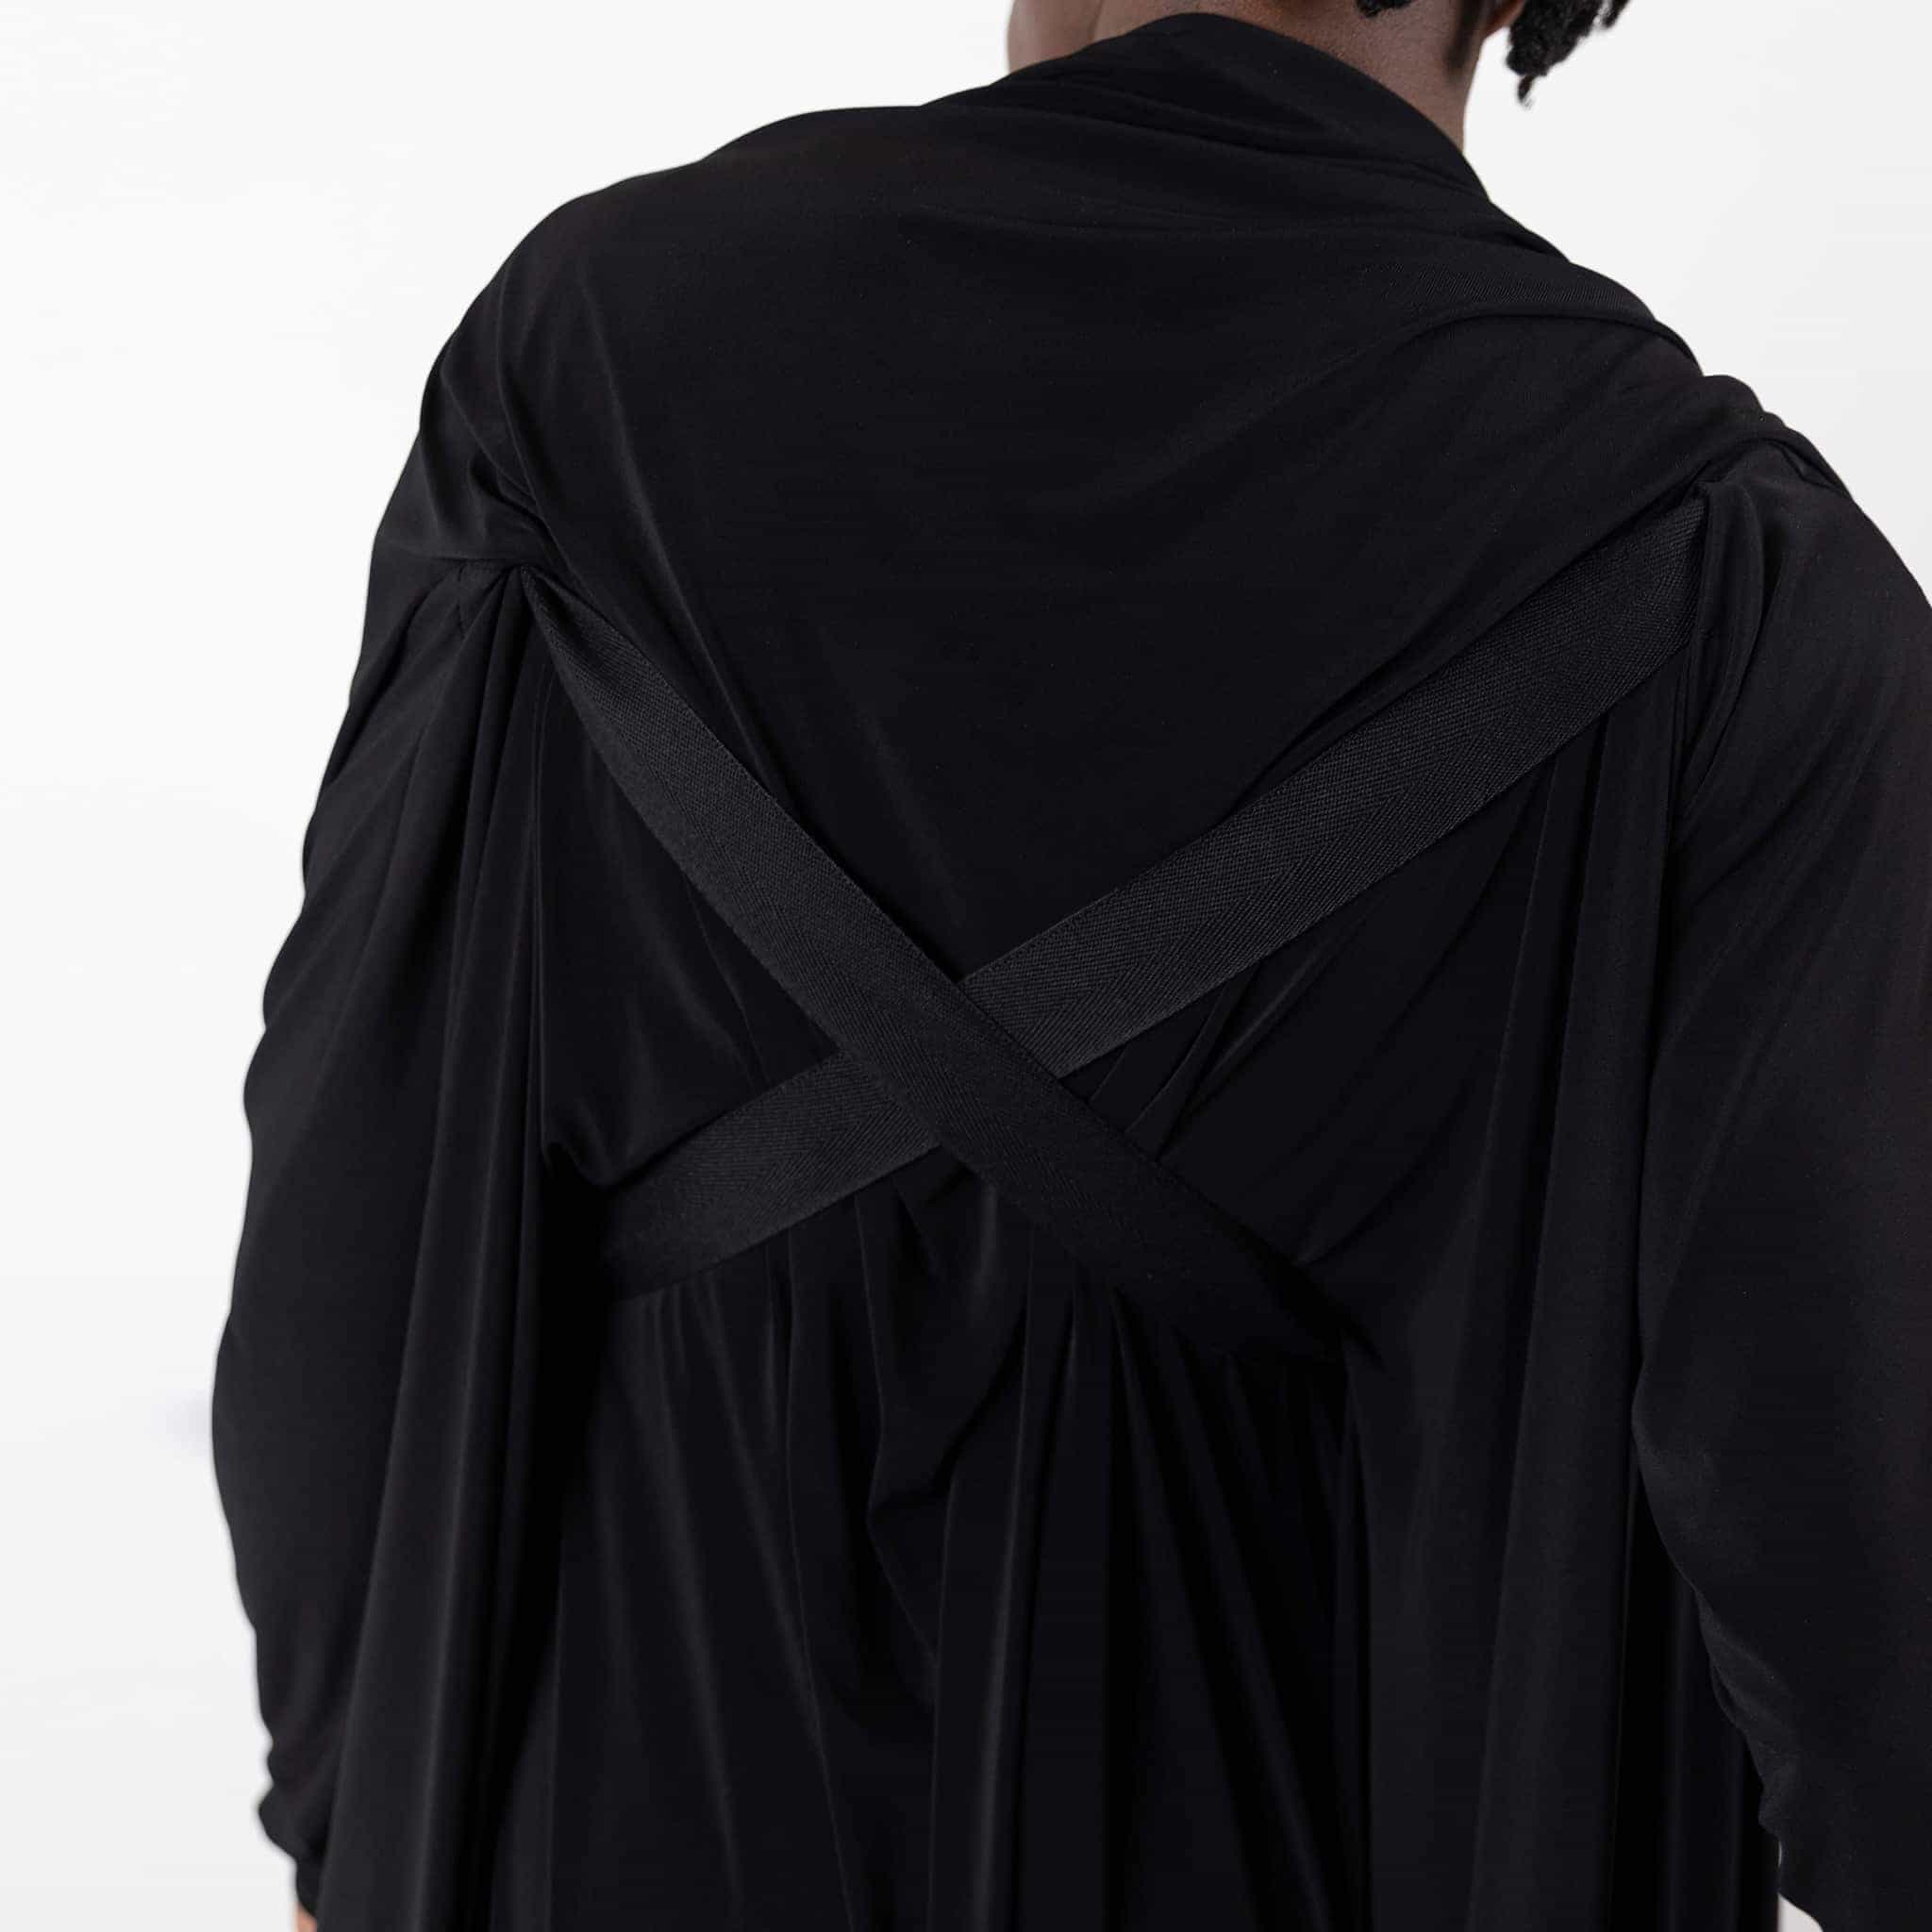   ZERØ London - Back view, black long sleeved zero waste cardigan robe with harness and black trousers designed & made in London